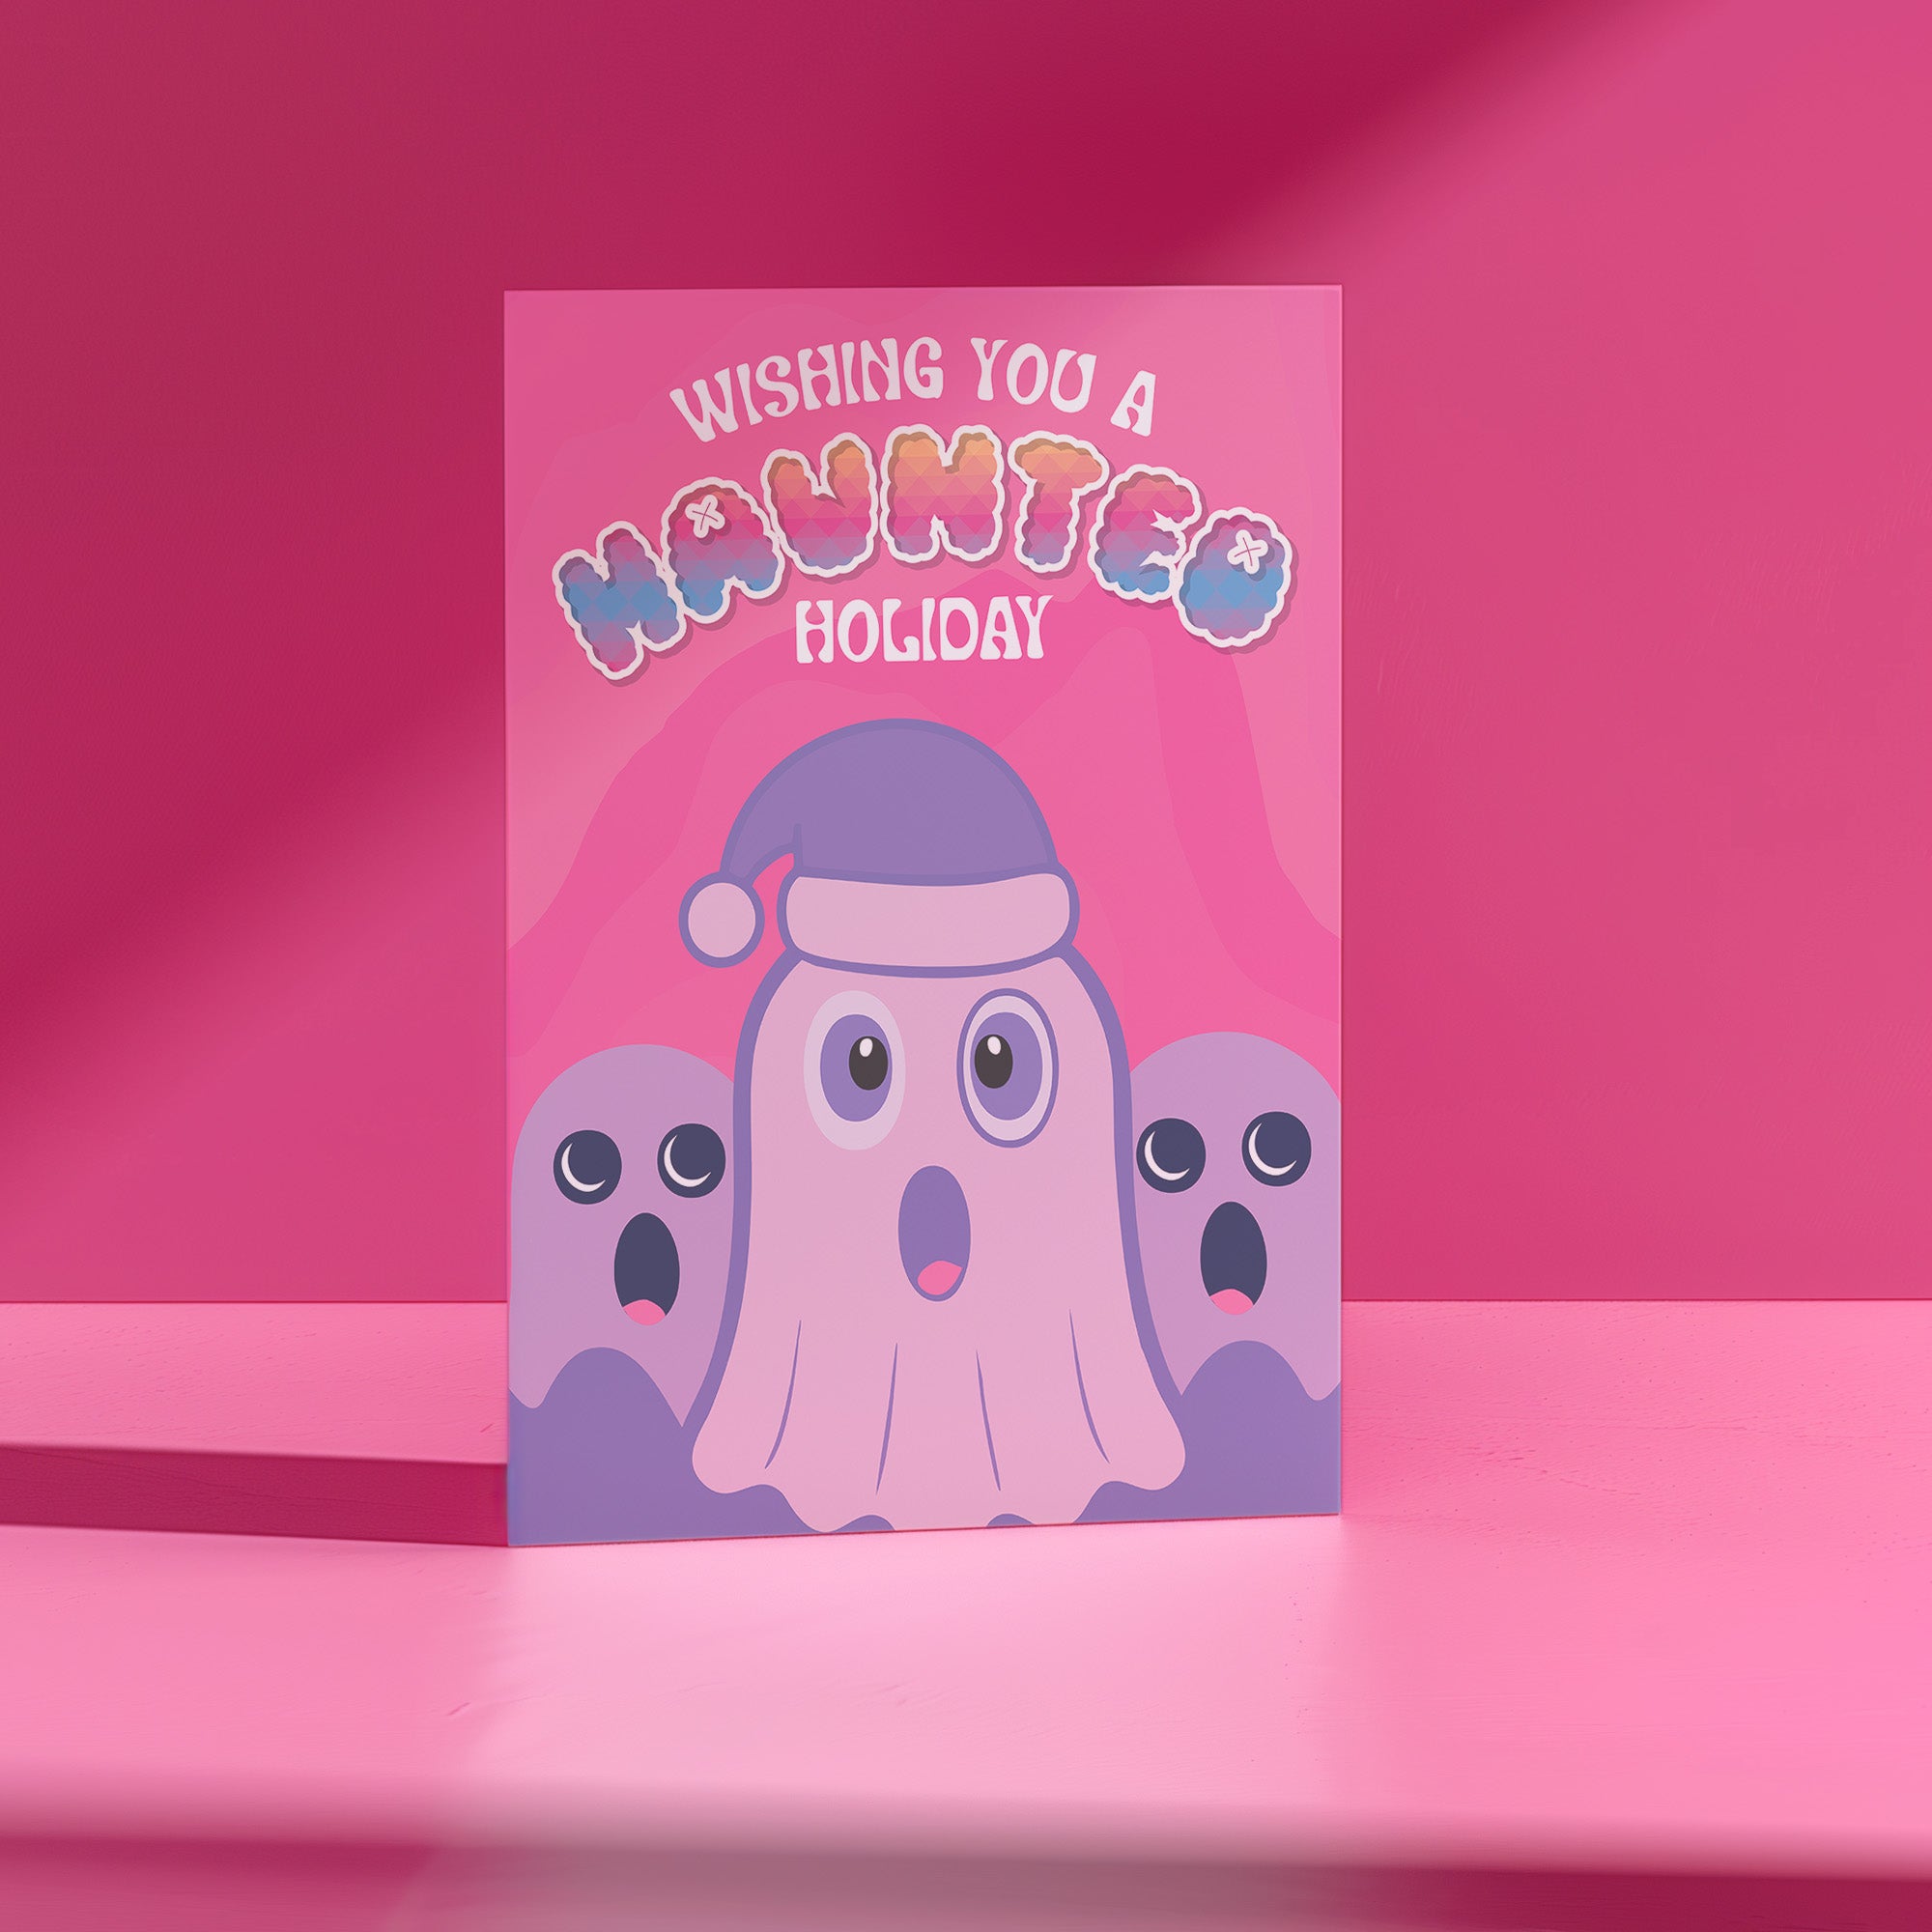 Holiday card with pink background featuring cartoon ghosts. Main ghost wears purple Santa hat. Text reads 